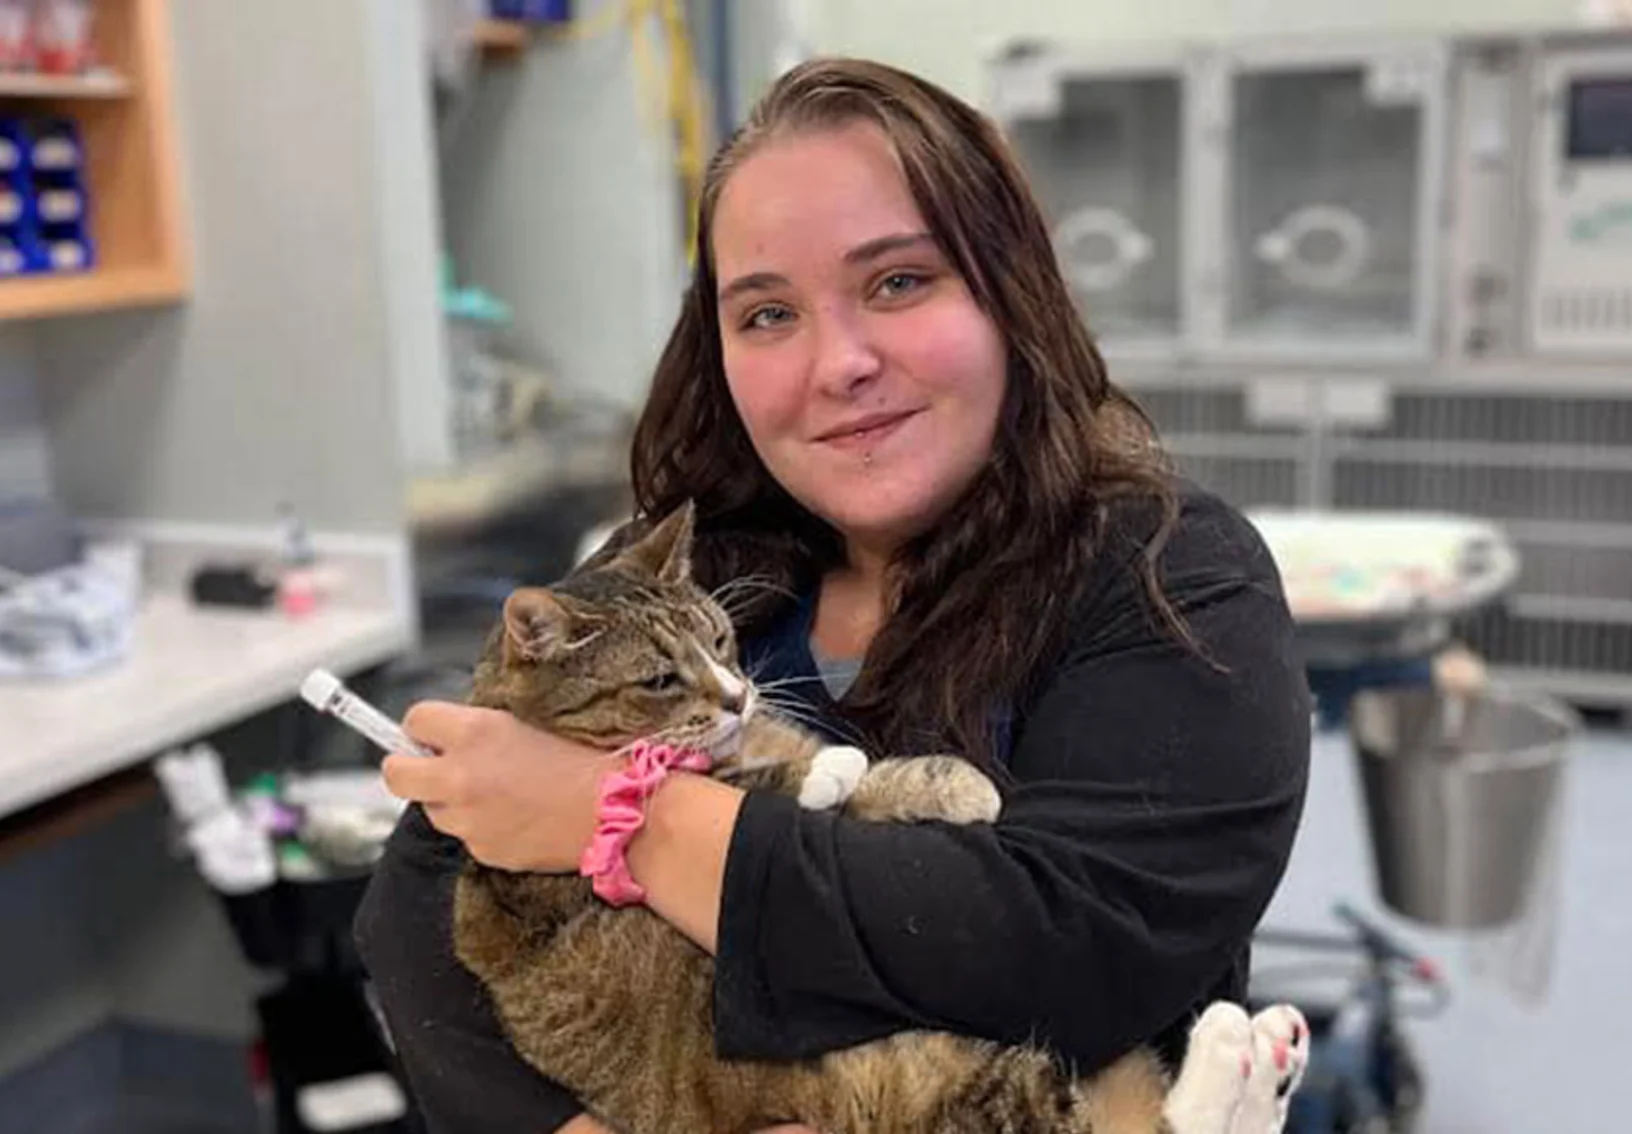 Staff member holding a brown cat